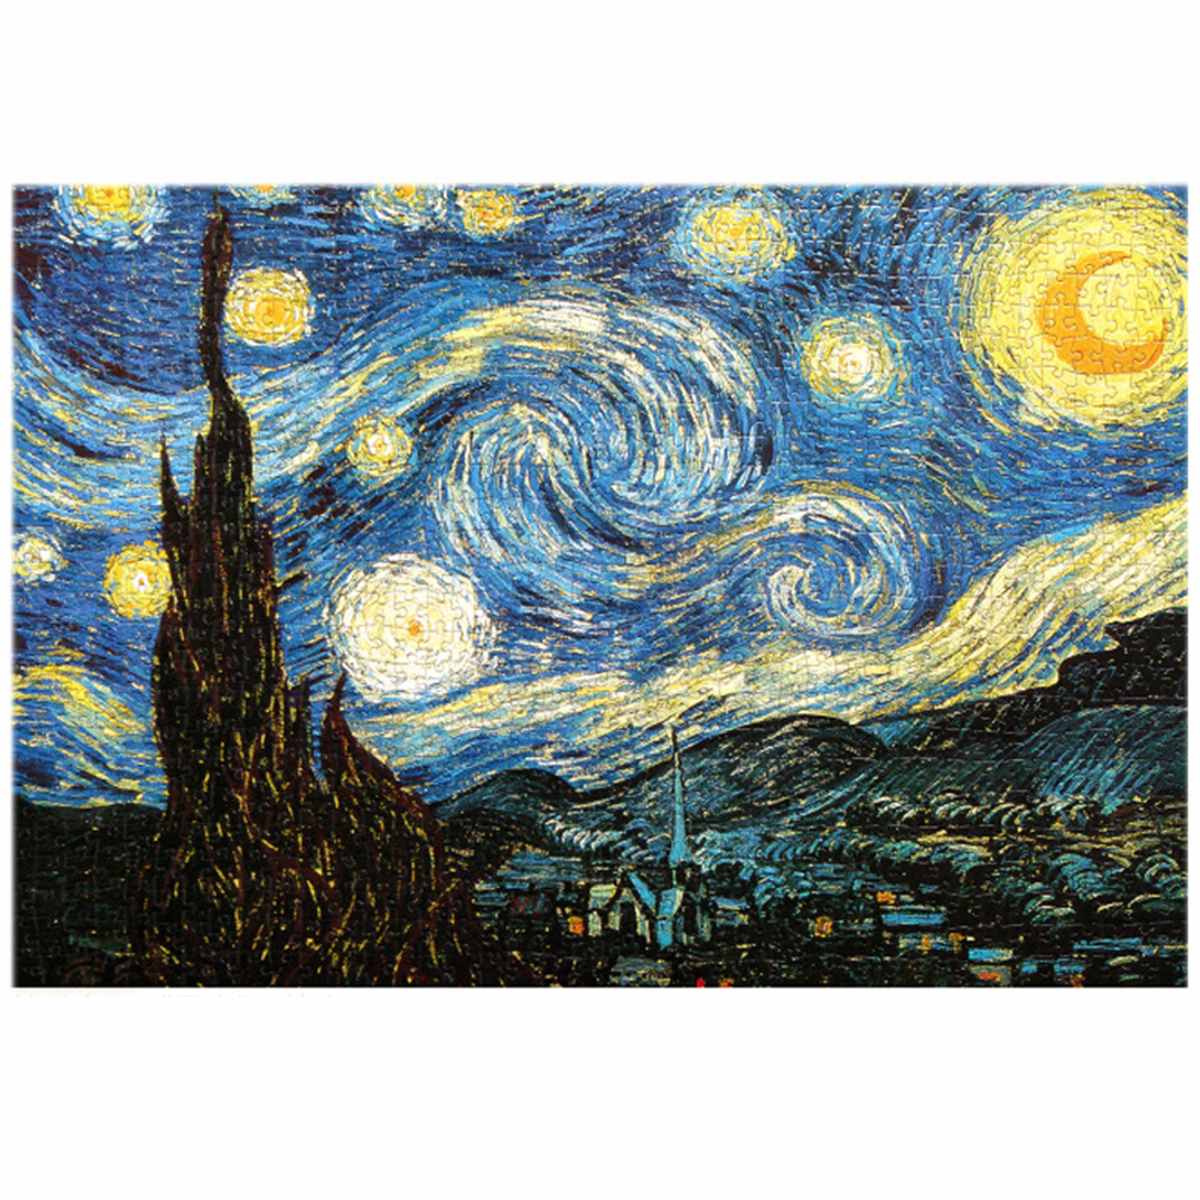 1000-Pieces-Nuit-Etoilee-DIY-Assembly-Jigsaw-Puzzles-Landscape-Picture-Educational-Games-Toy-for-Adu-1844620-1